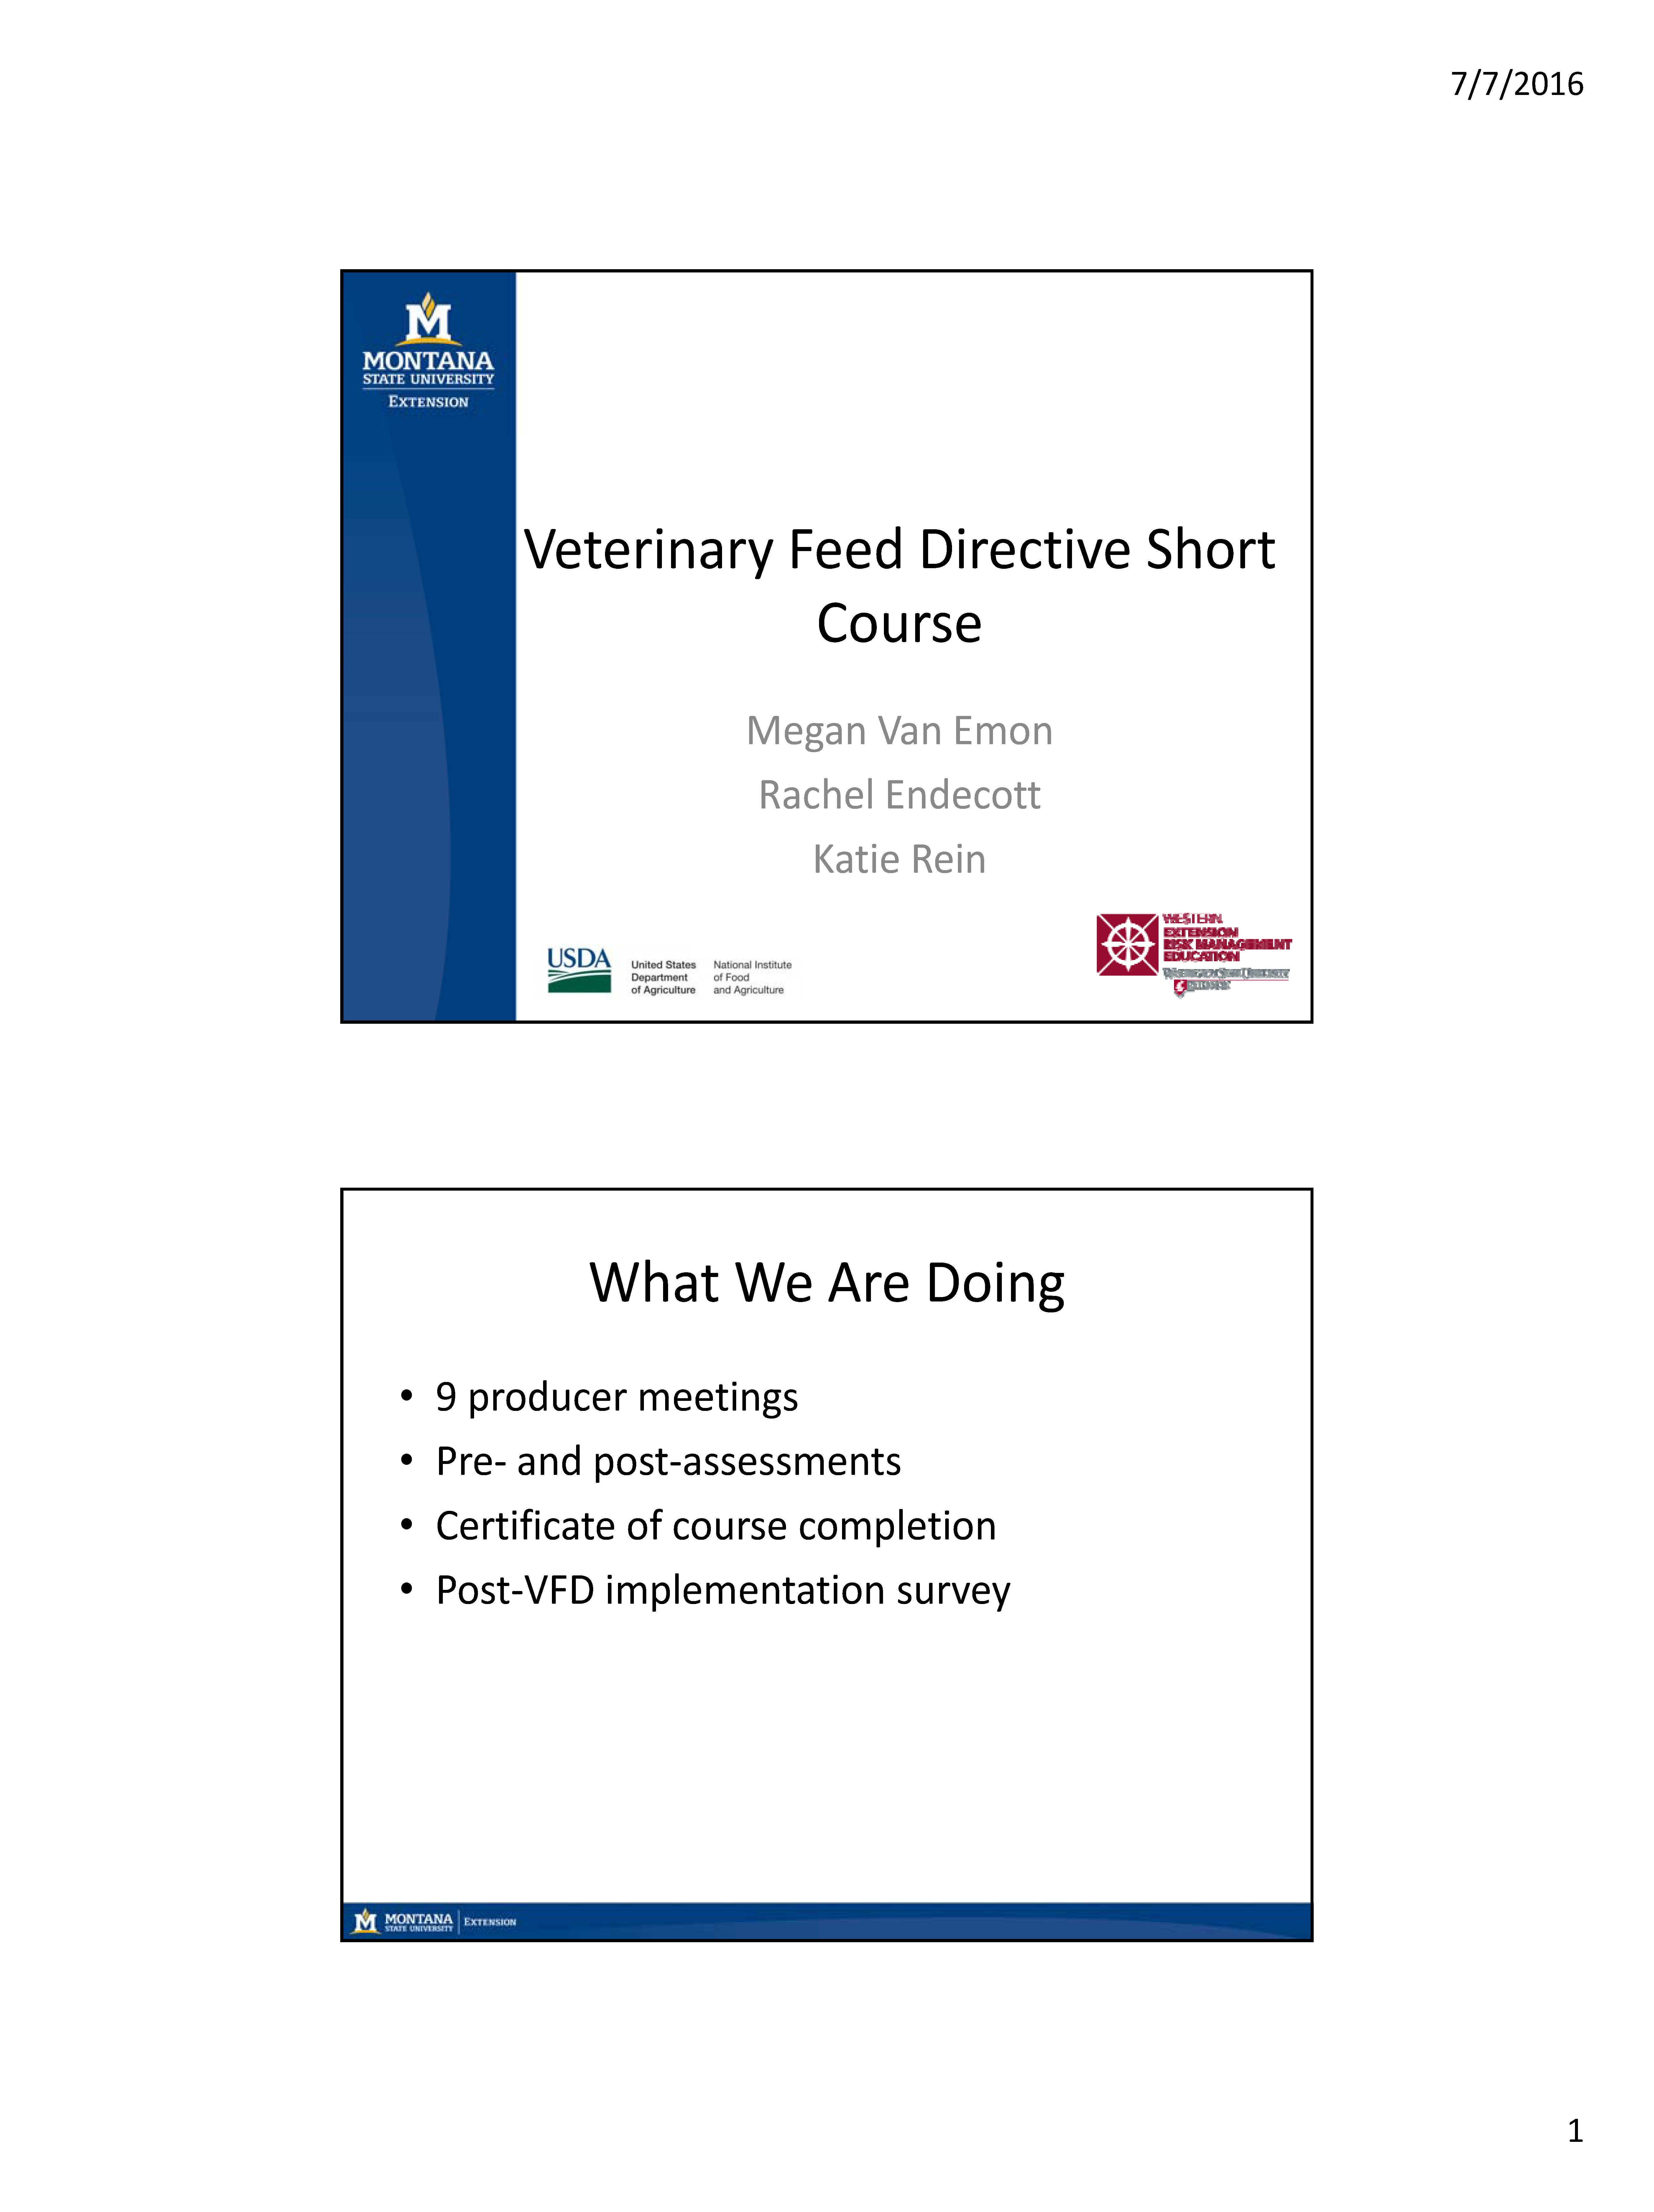 Introductory slides from a presentation about the Veterinary Feed Directive short course.